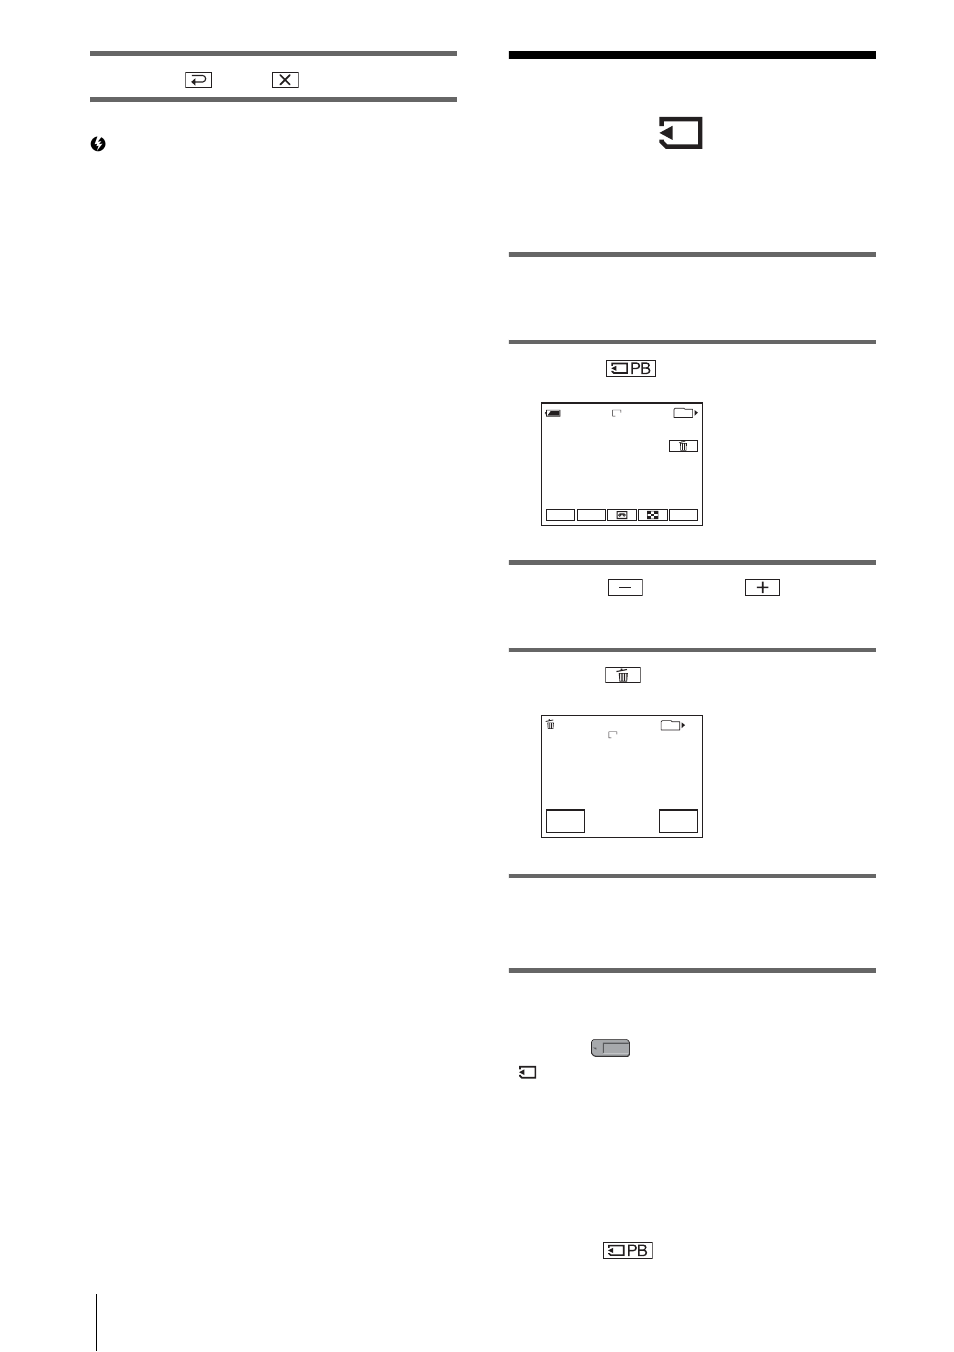 Deleting recorded pictures, N (p. 80) | Sony DCR-IP1 User Manual | Page 80 / 116